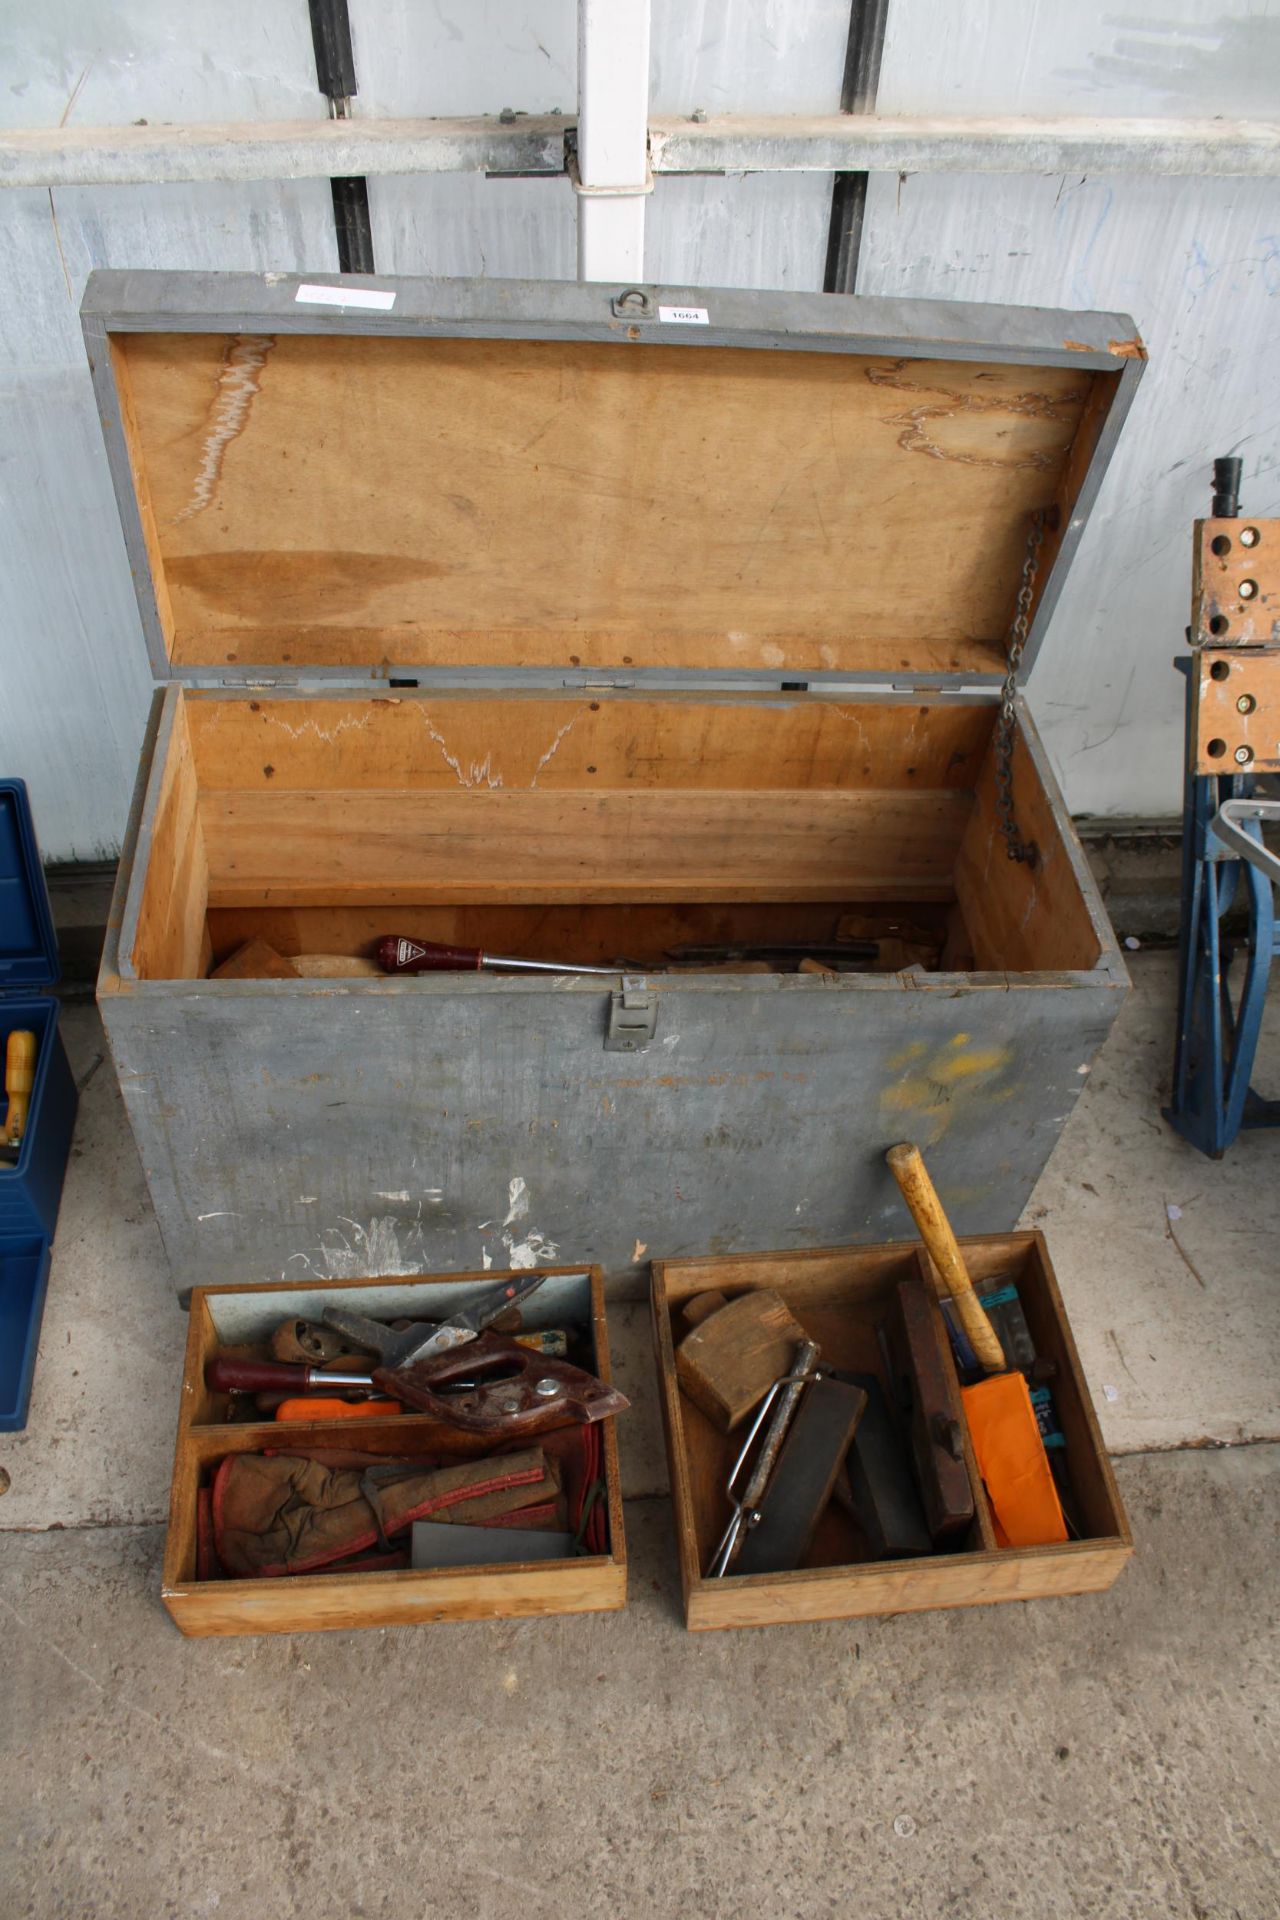 A LARGE WOODEN TOOL CHEST WITH A LARGE ASSORTMENT OF HAND TOOLS TO INCLUDE WOOD PLANES, CHISELS